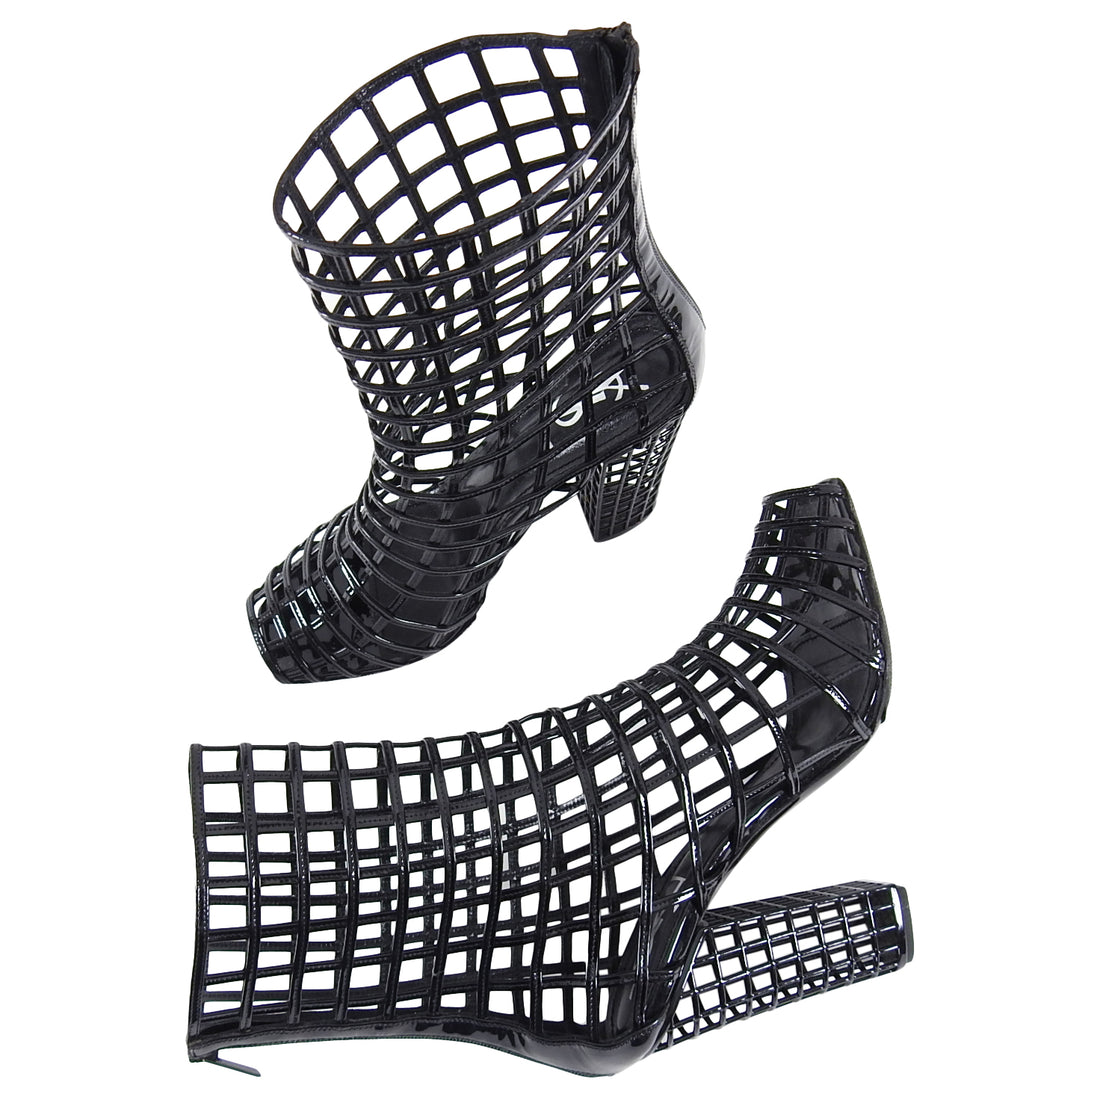 YSL Yves Saint Laurent Iconic 2009 Runway Black Cage Ankle Boots - 40